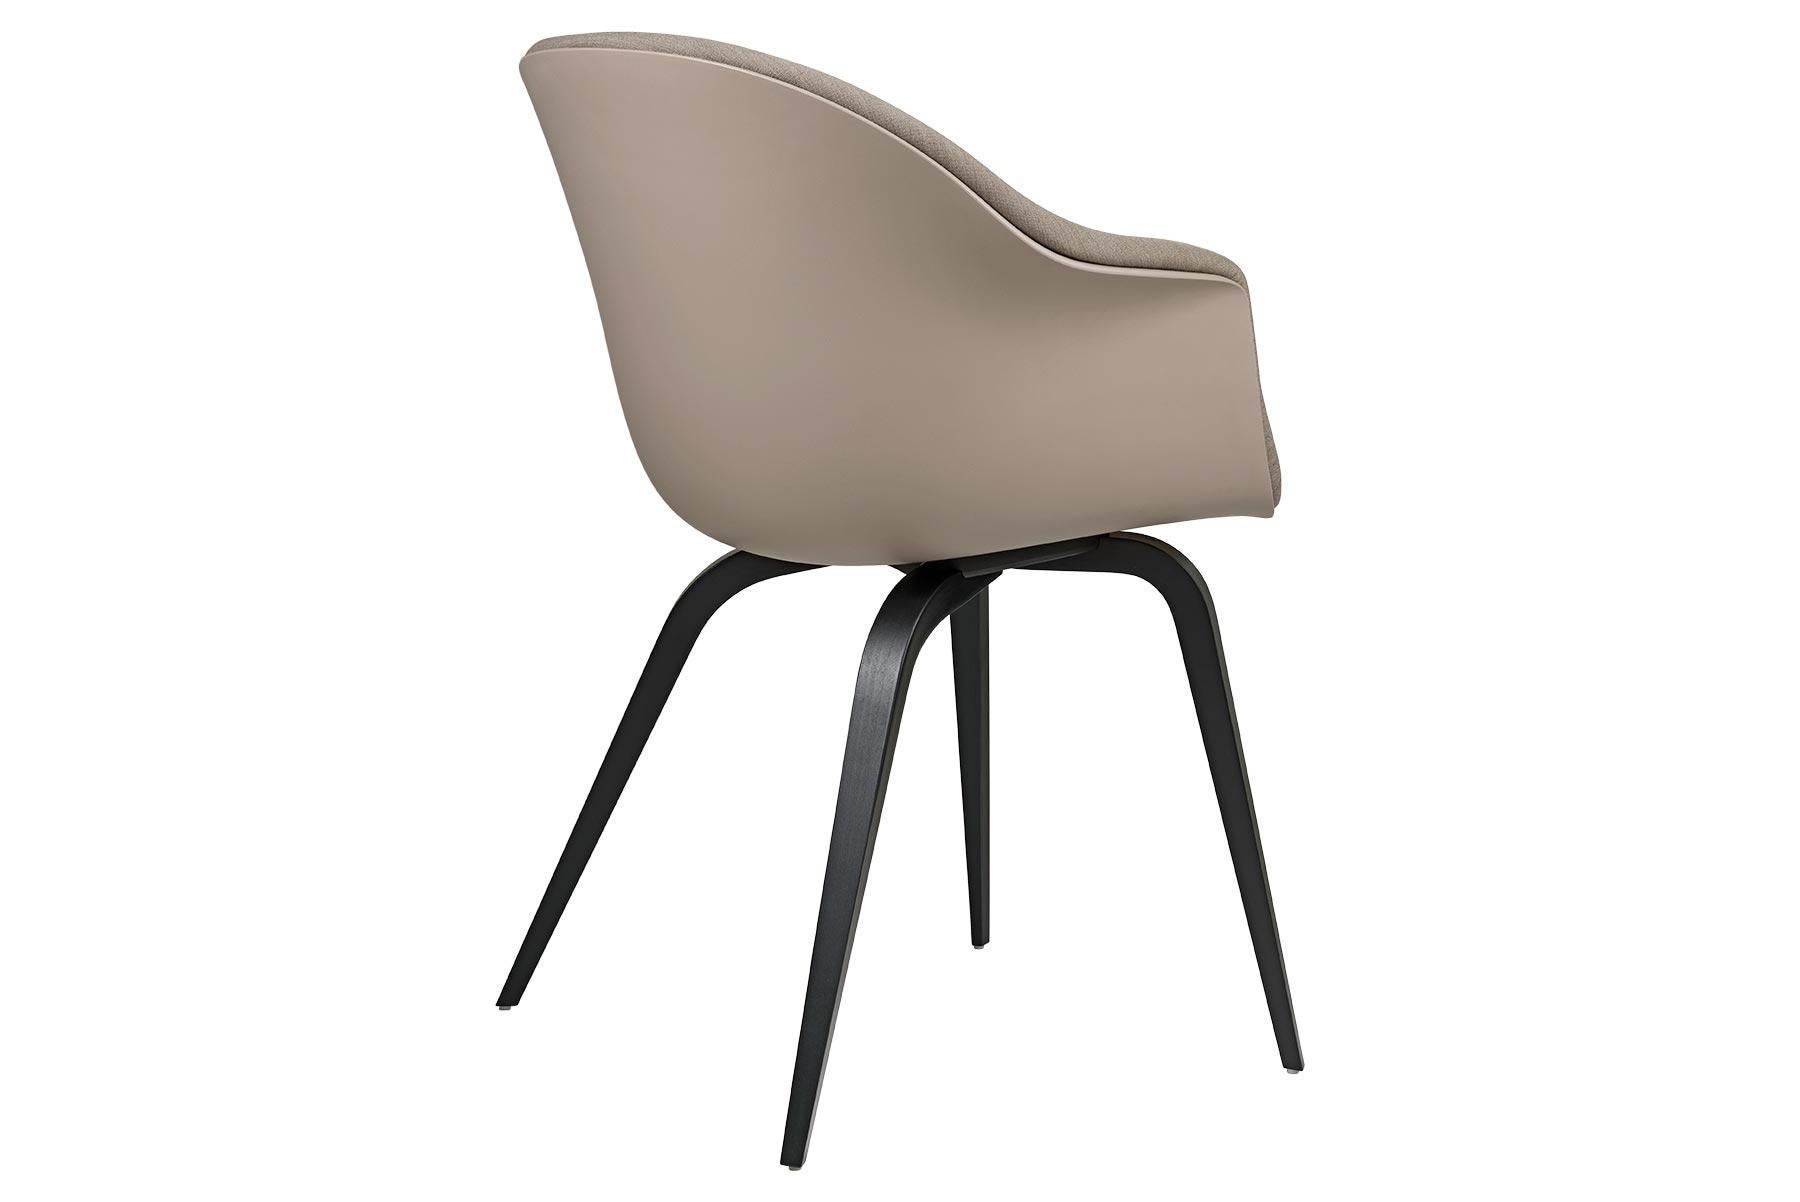 The Bat Dining Chair, designed by Danish-Italian design-duo GamFratesi, carries strong references to the interesting characteristics of bats, with its inviting, distinctive shell reminiscent of the shape of a bat’s wingspan. Balancing between the